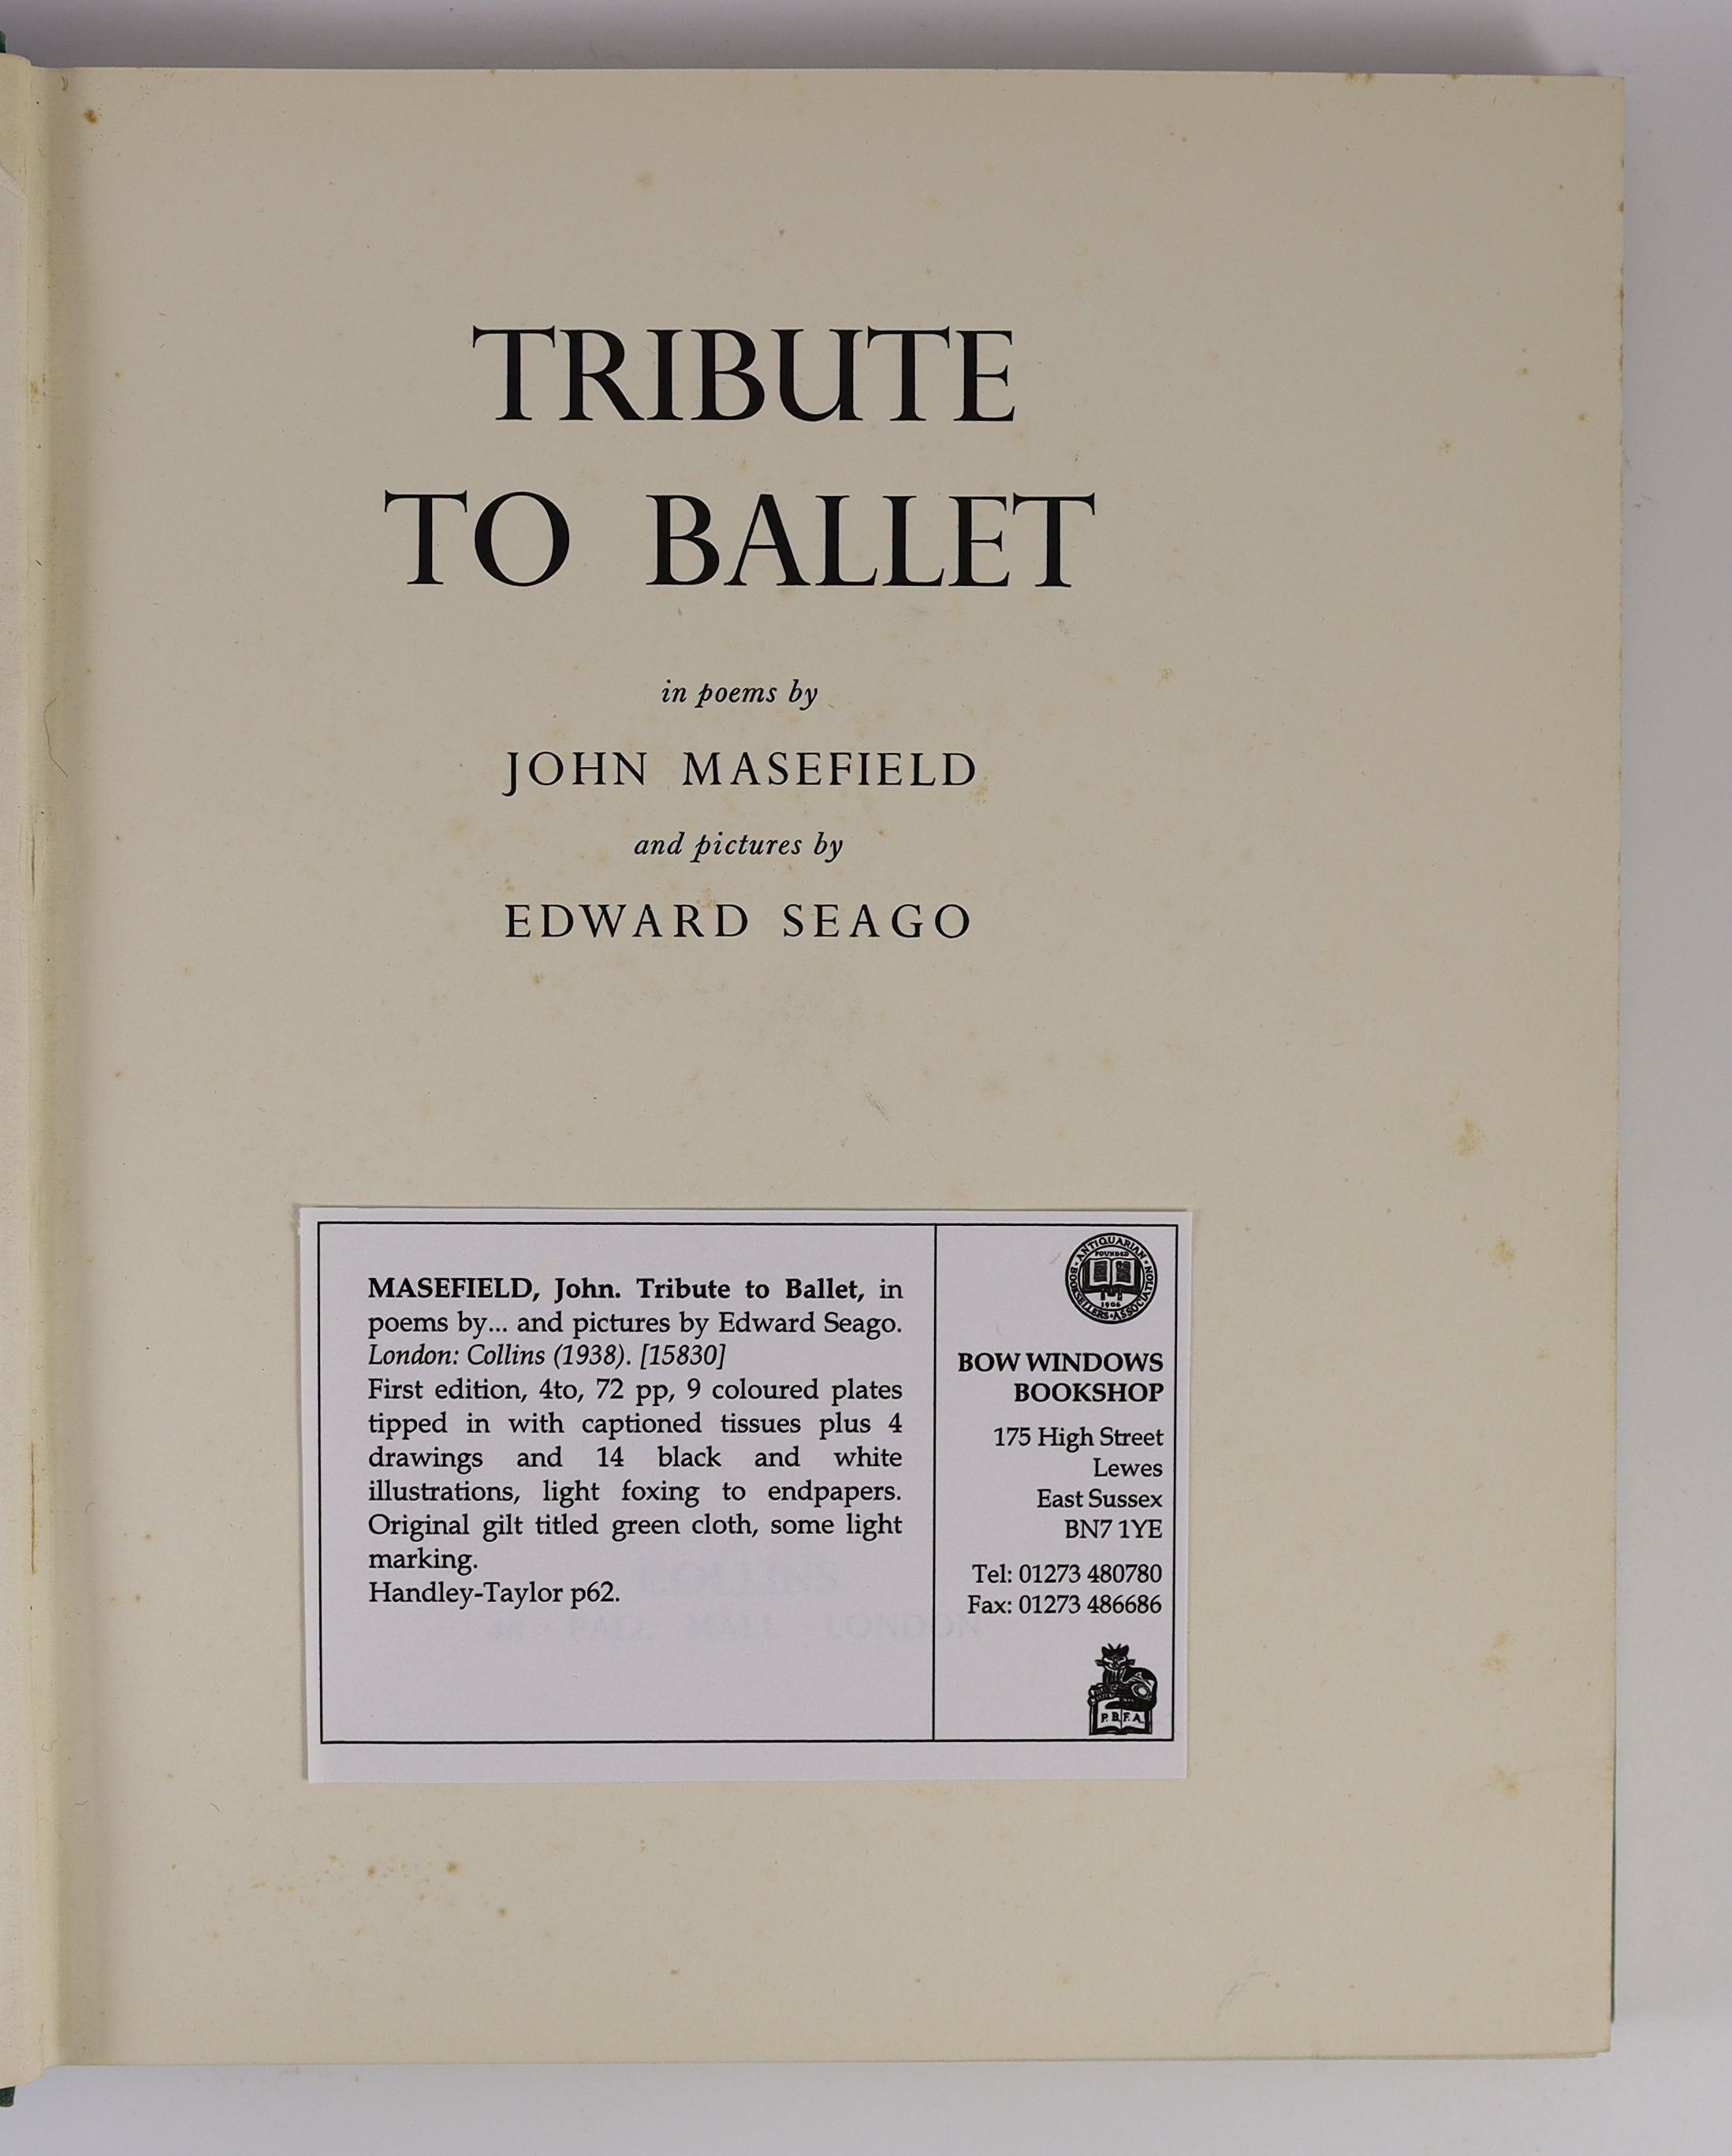 Masefield, John - The Country Scene, 1st edition, illustrated with 42 coloured plates by Edward Seago, 4to, half cloth, Collins, London, 1937 and Tribute to Ballet, illustrated by Edward Seago, Collins, London, 1938 (2)